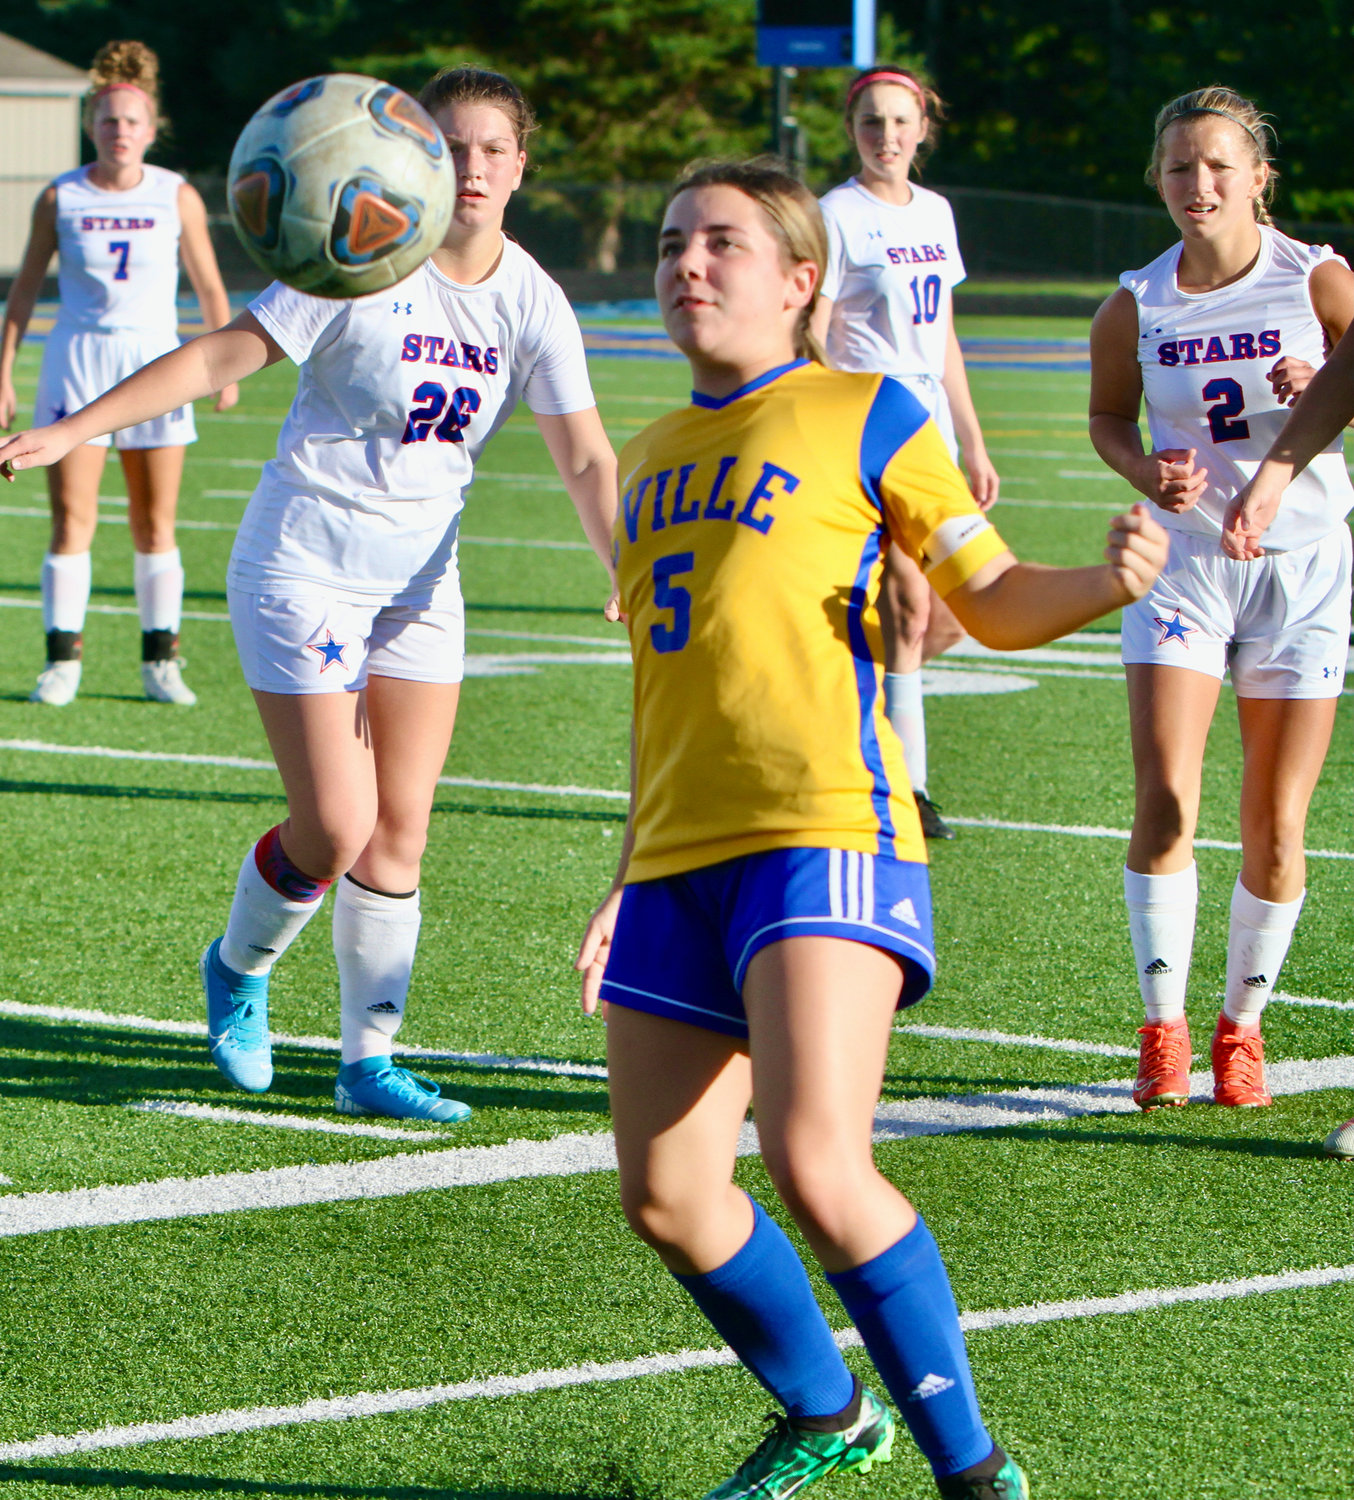 Crawfordsville senior Paige Corbin fields a pass off her chest during the 3-1 loss to Western Boone on Wednesday.